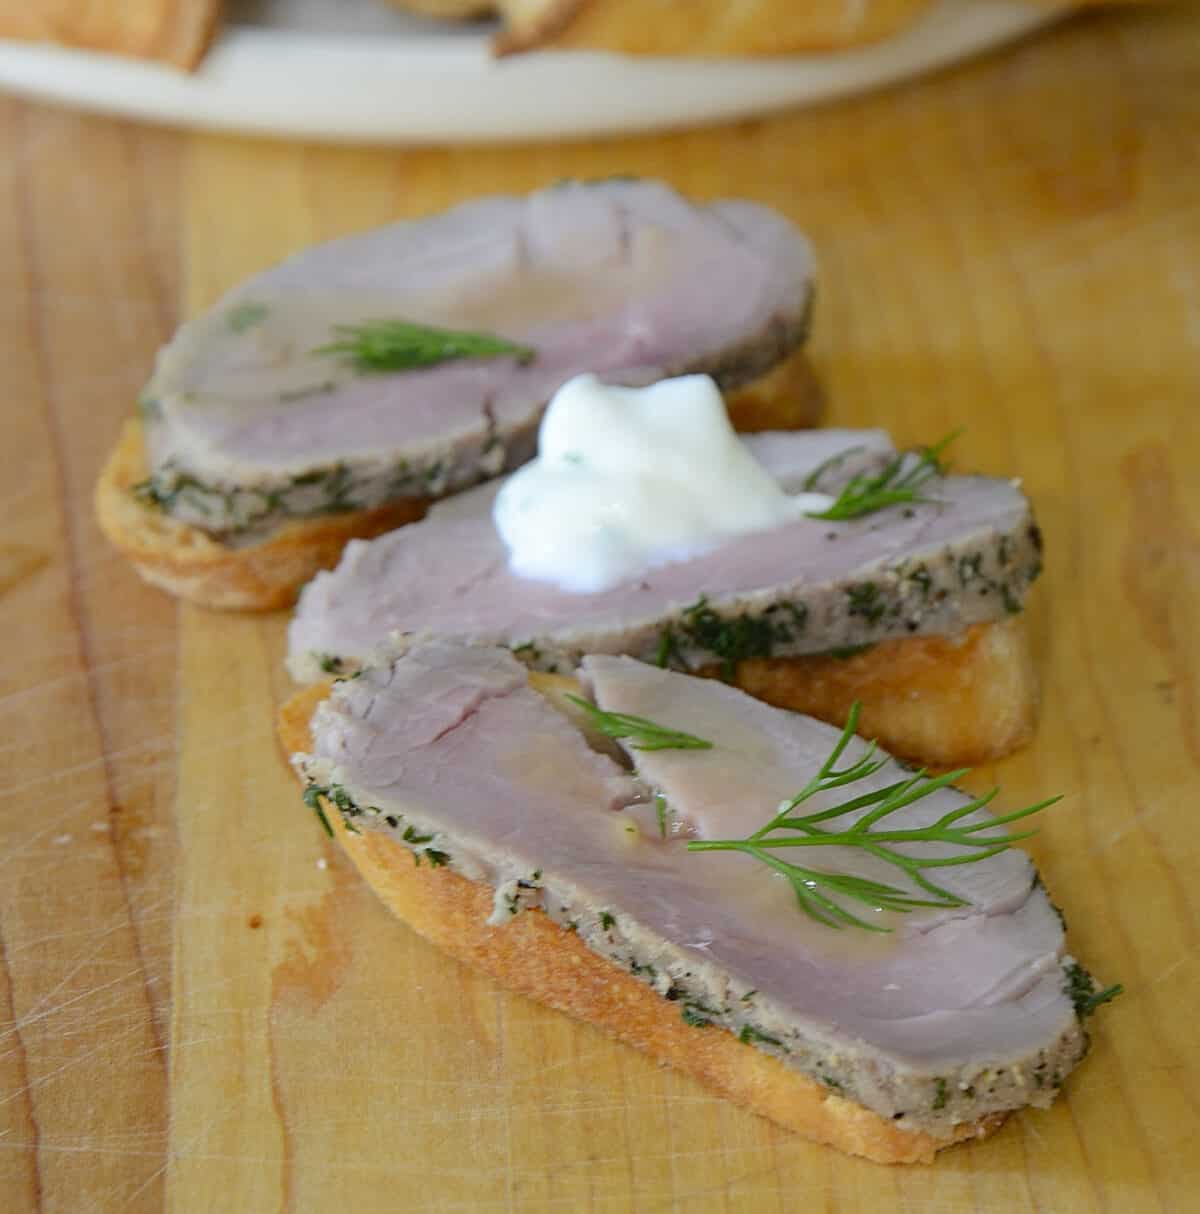 Slices of dill cured pork tenderloin garnished with mustard sauce.